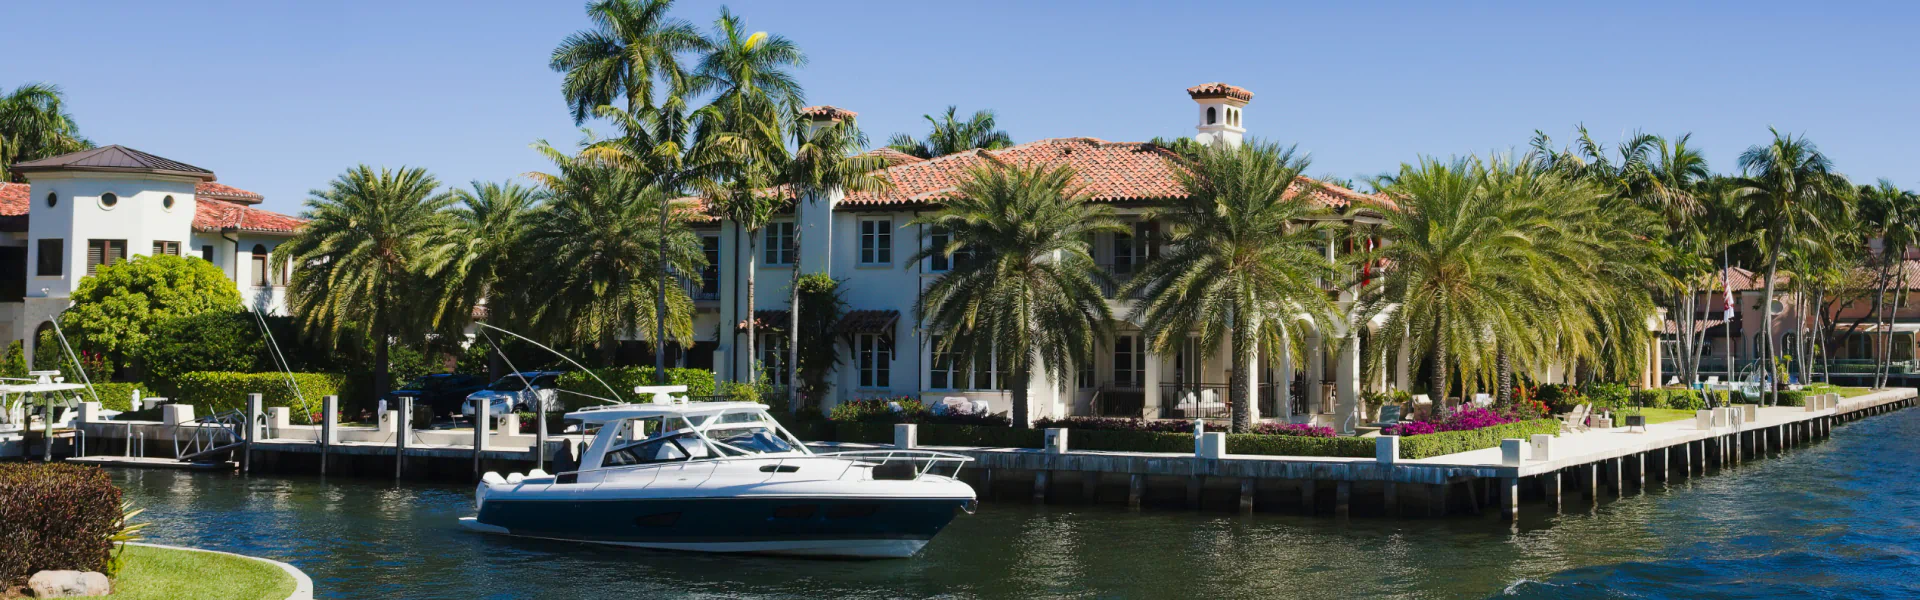 luxurious residential house surrounded by water and small yacht cypress lake fl